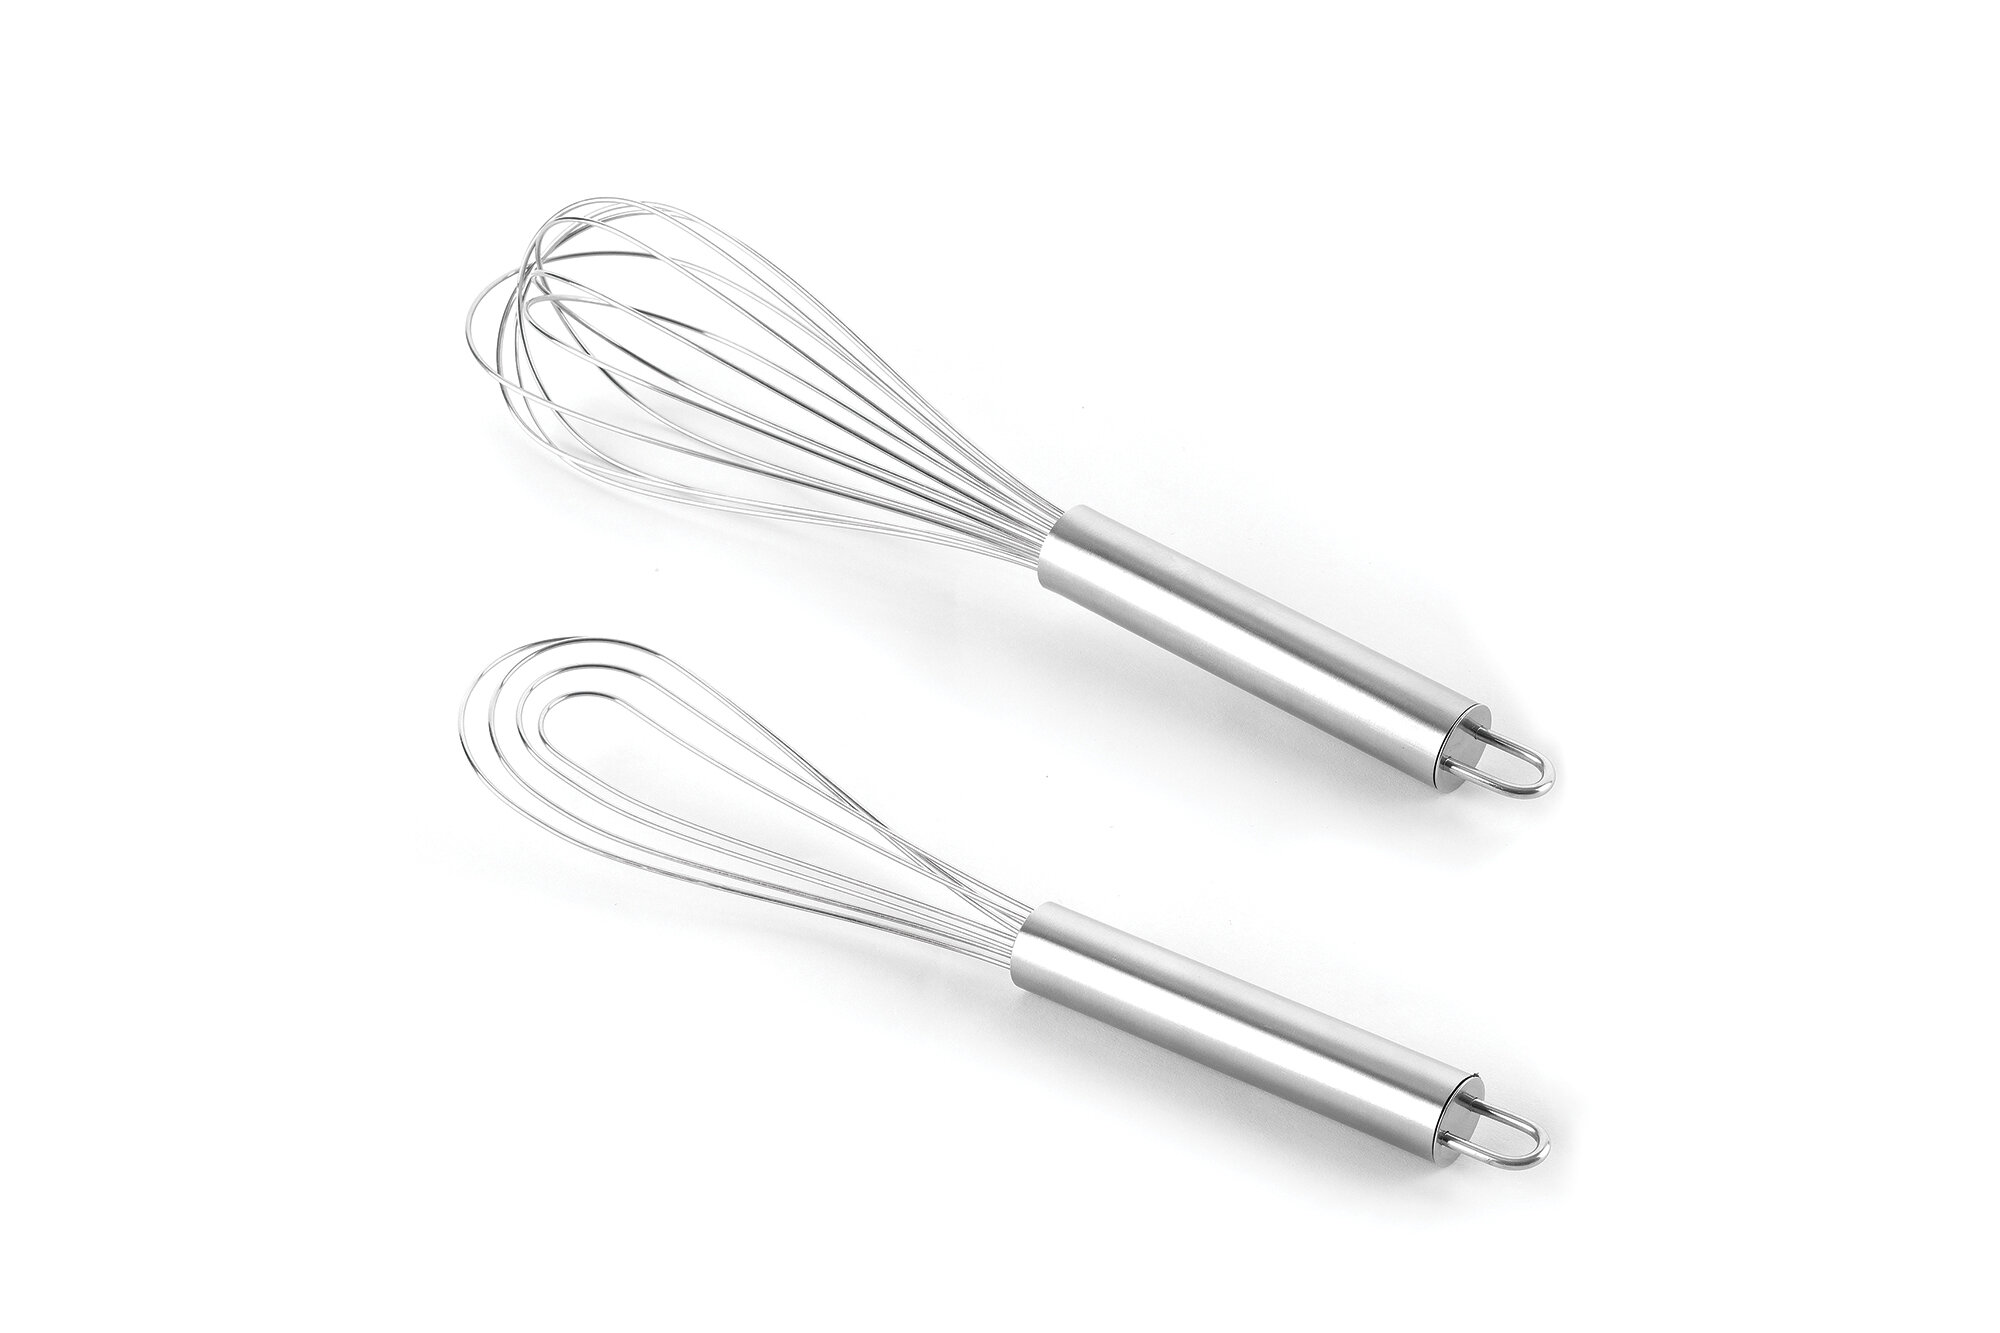 Tovolo Whisk Assortment | Set of 5